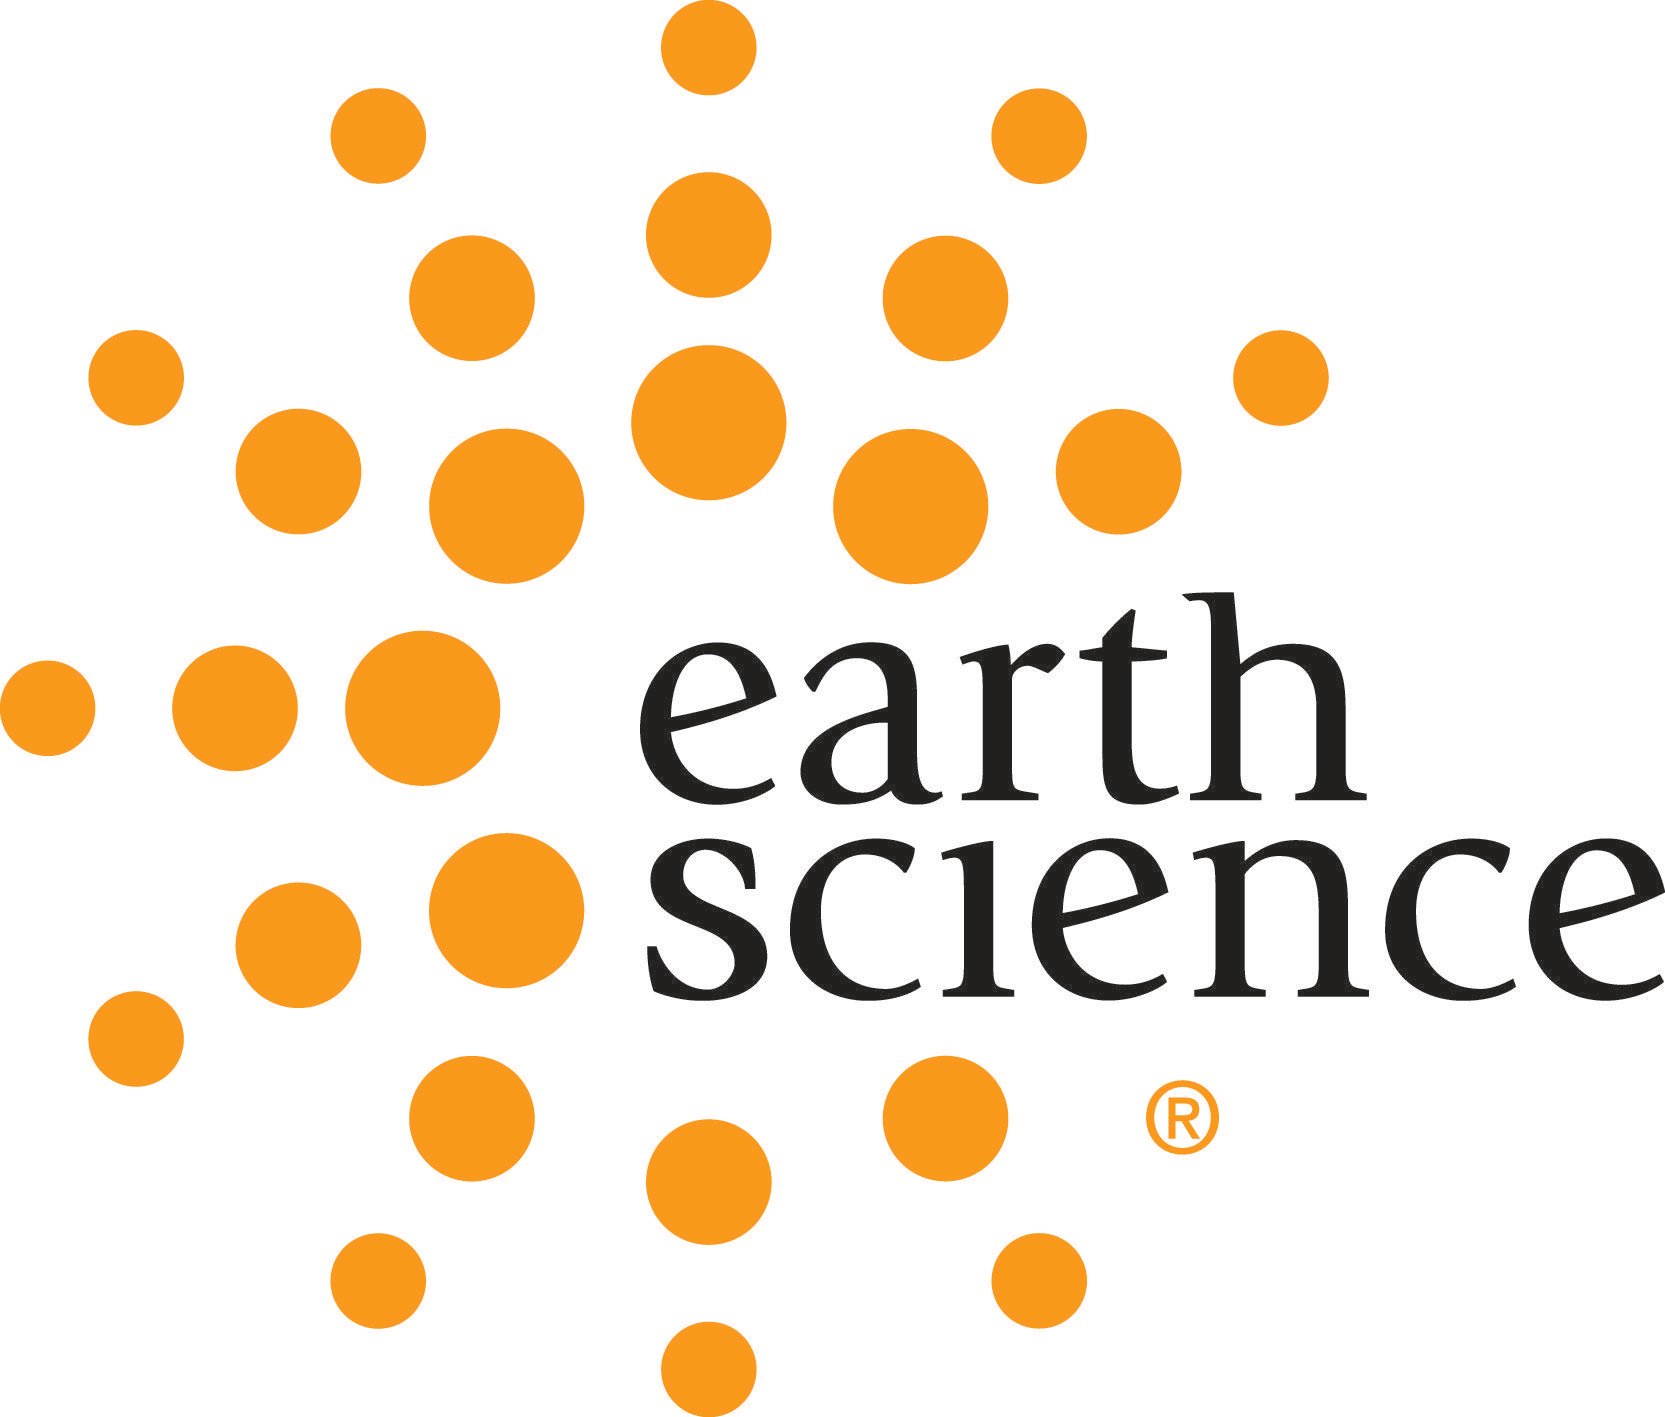 Earth Science Logo - a new Earth Science logo. Clipart Image